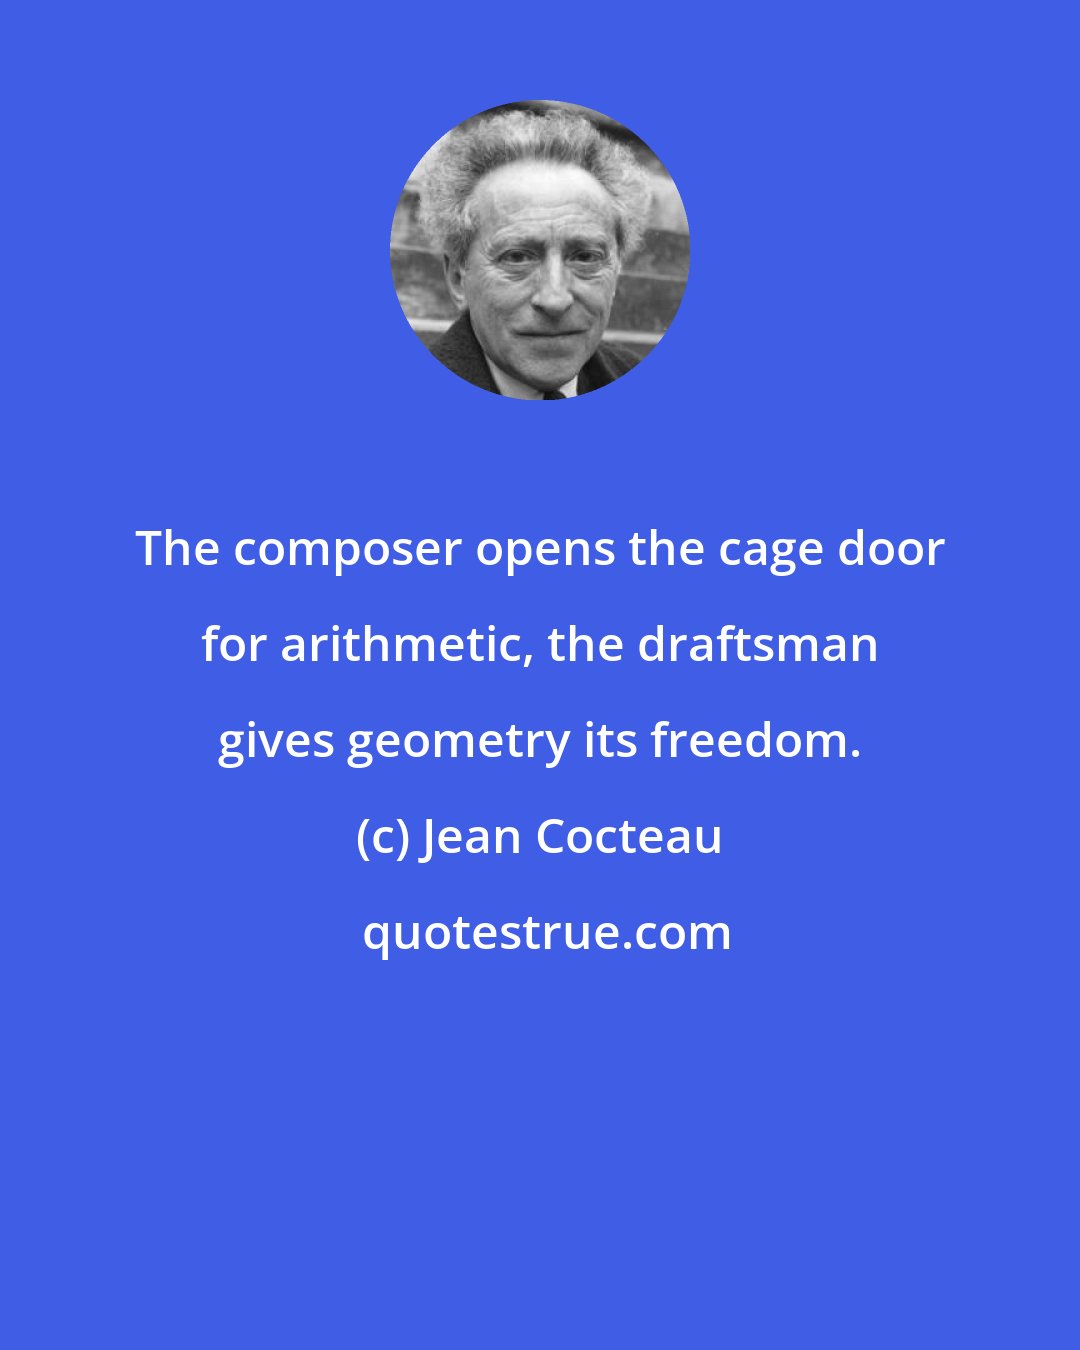 Jean Cocteau: The composer opens the cage door for arithmetic, the draftsman gives geometry its freedom.